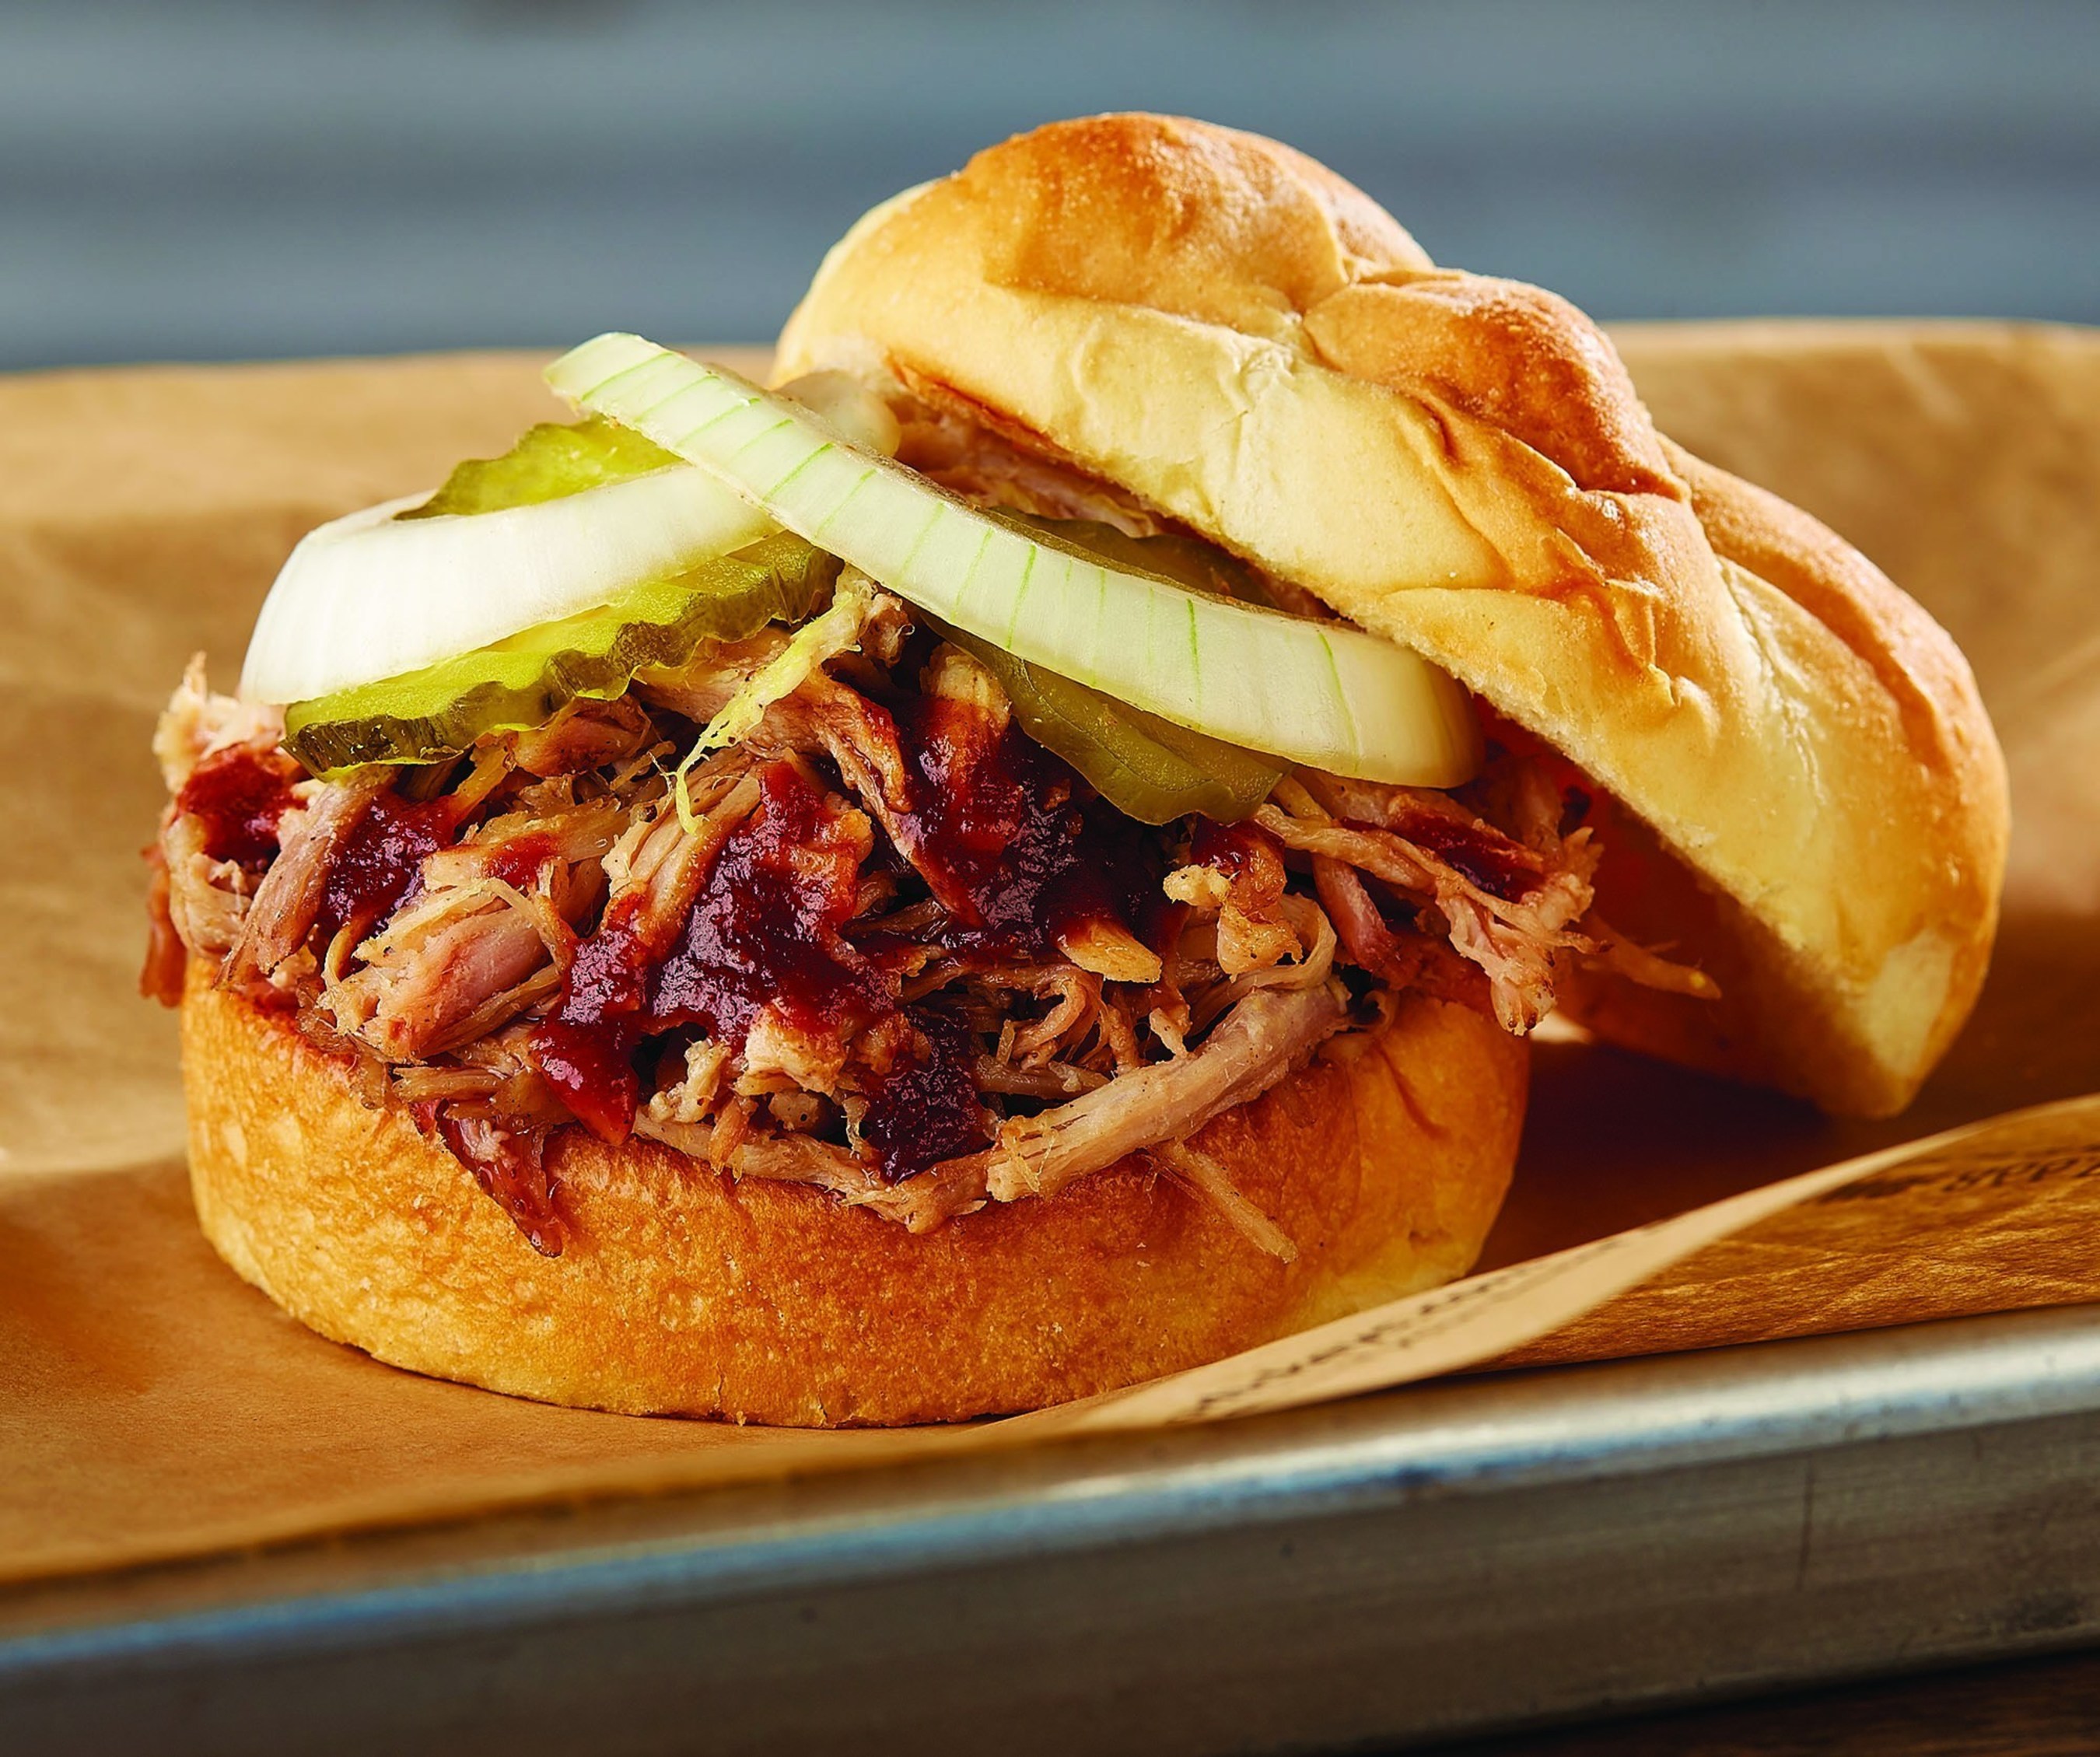 Dickey's Barbecue Pit arrives to Gillette on Thursday with a three day grand opening. Location serves up $2 pulled pork sandwiches on Friday when three lucky guests win free barbecue for an entire year!